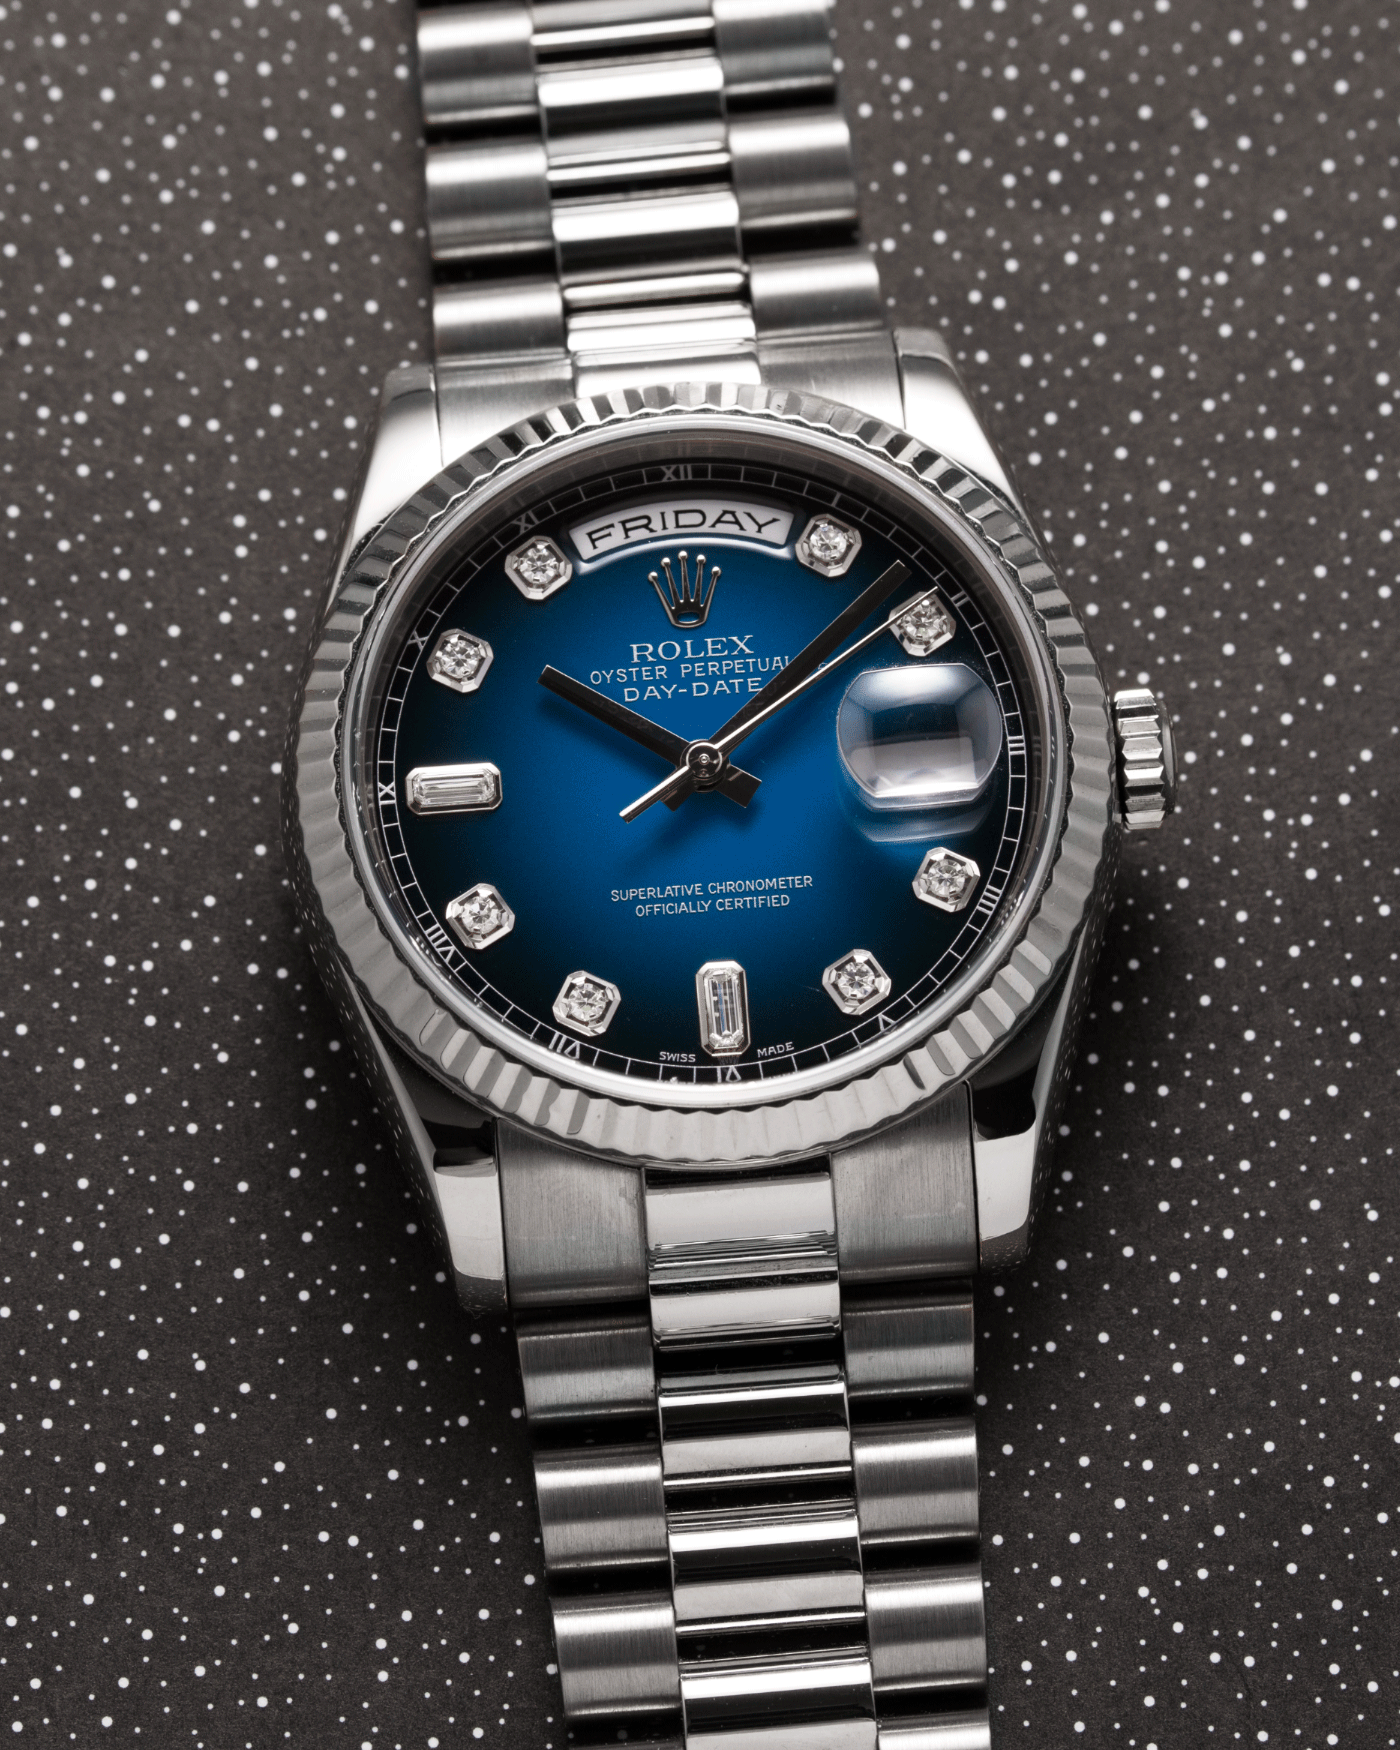 Brand: Rolex Year: 2000 Model: Day Date Reference Number: 118239 Serial Number: P Serial Material: 18k White Gold Movement: Cal. 3155 Case Diameter: 36mm Lug Width: 20mm Bracelet/Strap: Rolex 18k White Gold 83859 President Bracelet